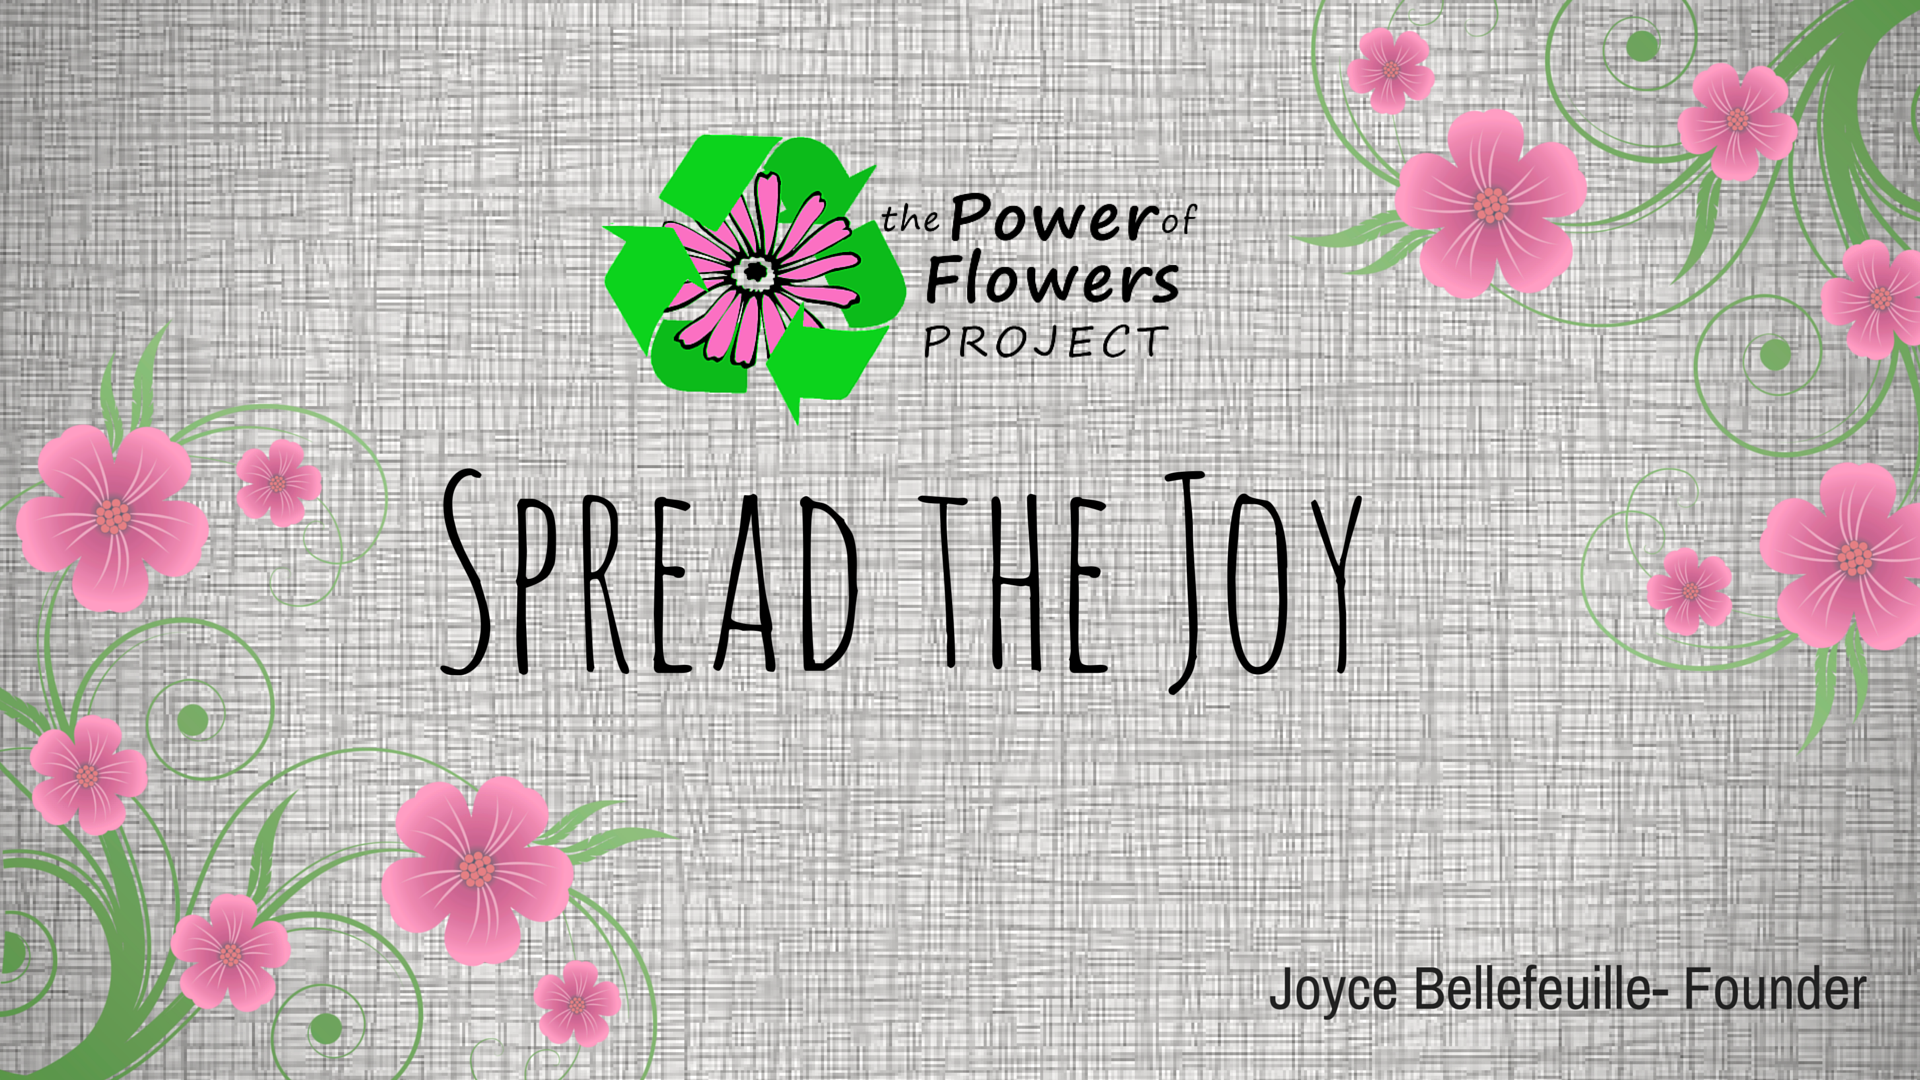 Welcome to the Power of Flowers Project!